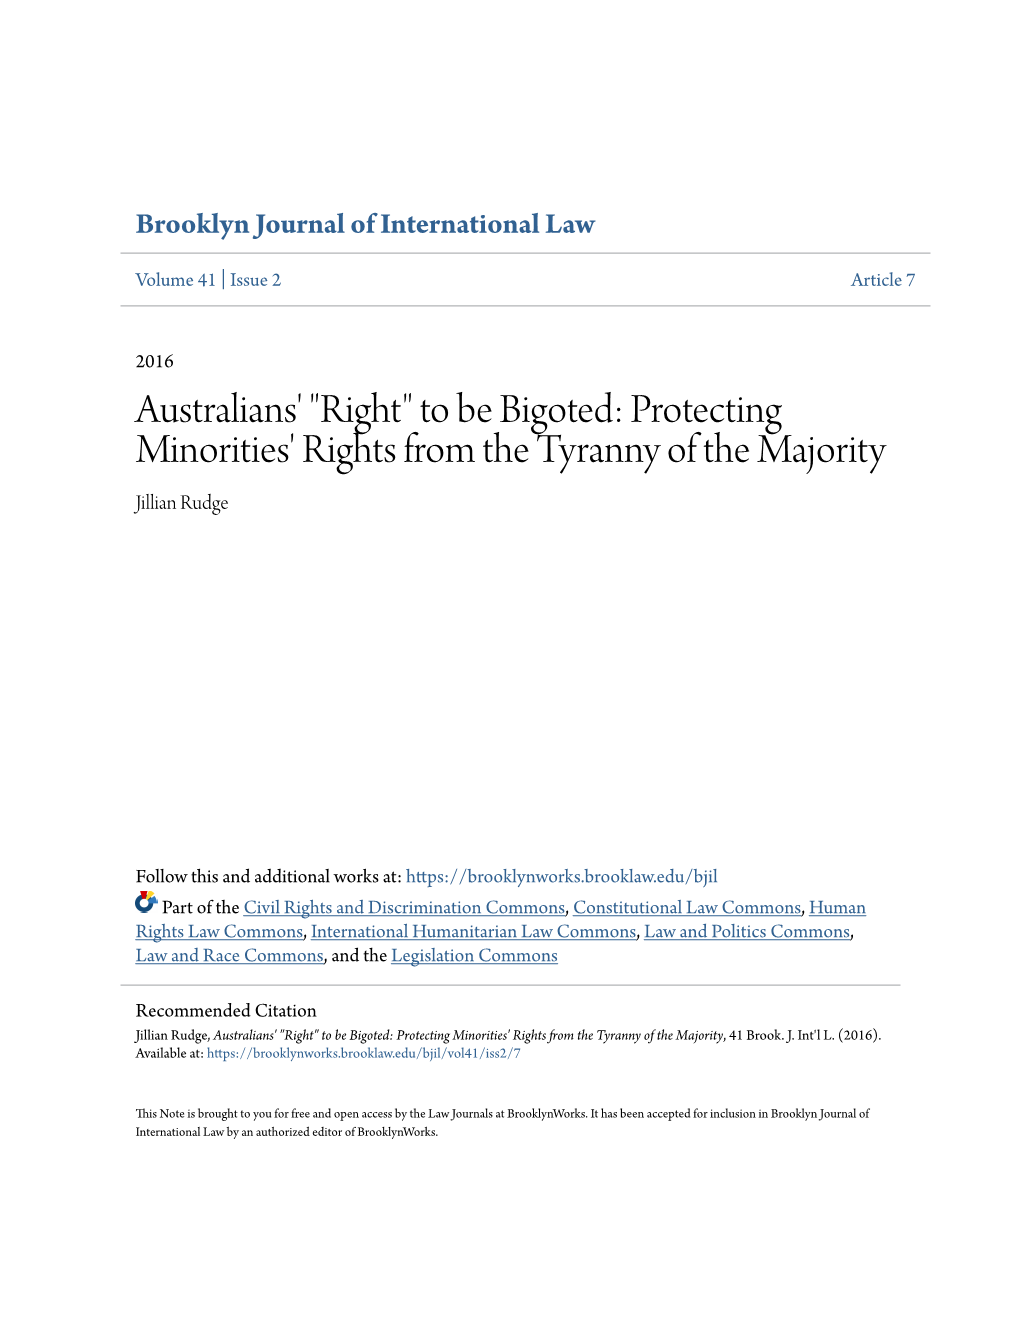 Australians' "Right" to Be Bigoted: Protecting Minorities' Rights from the Tyranny of the Majority Jillian Rudge